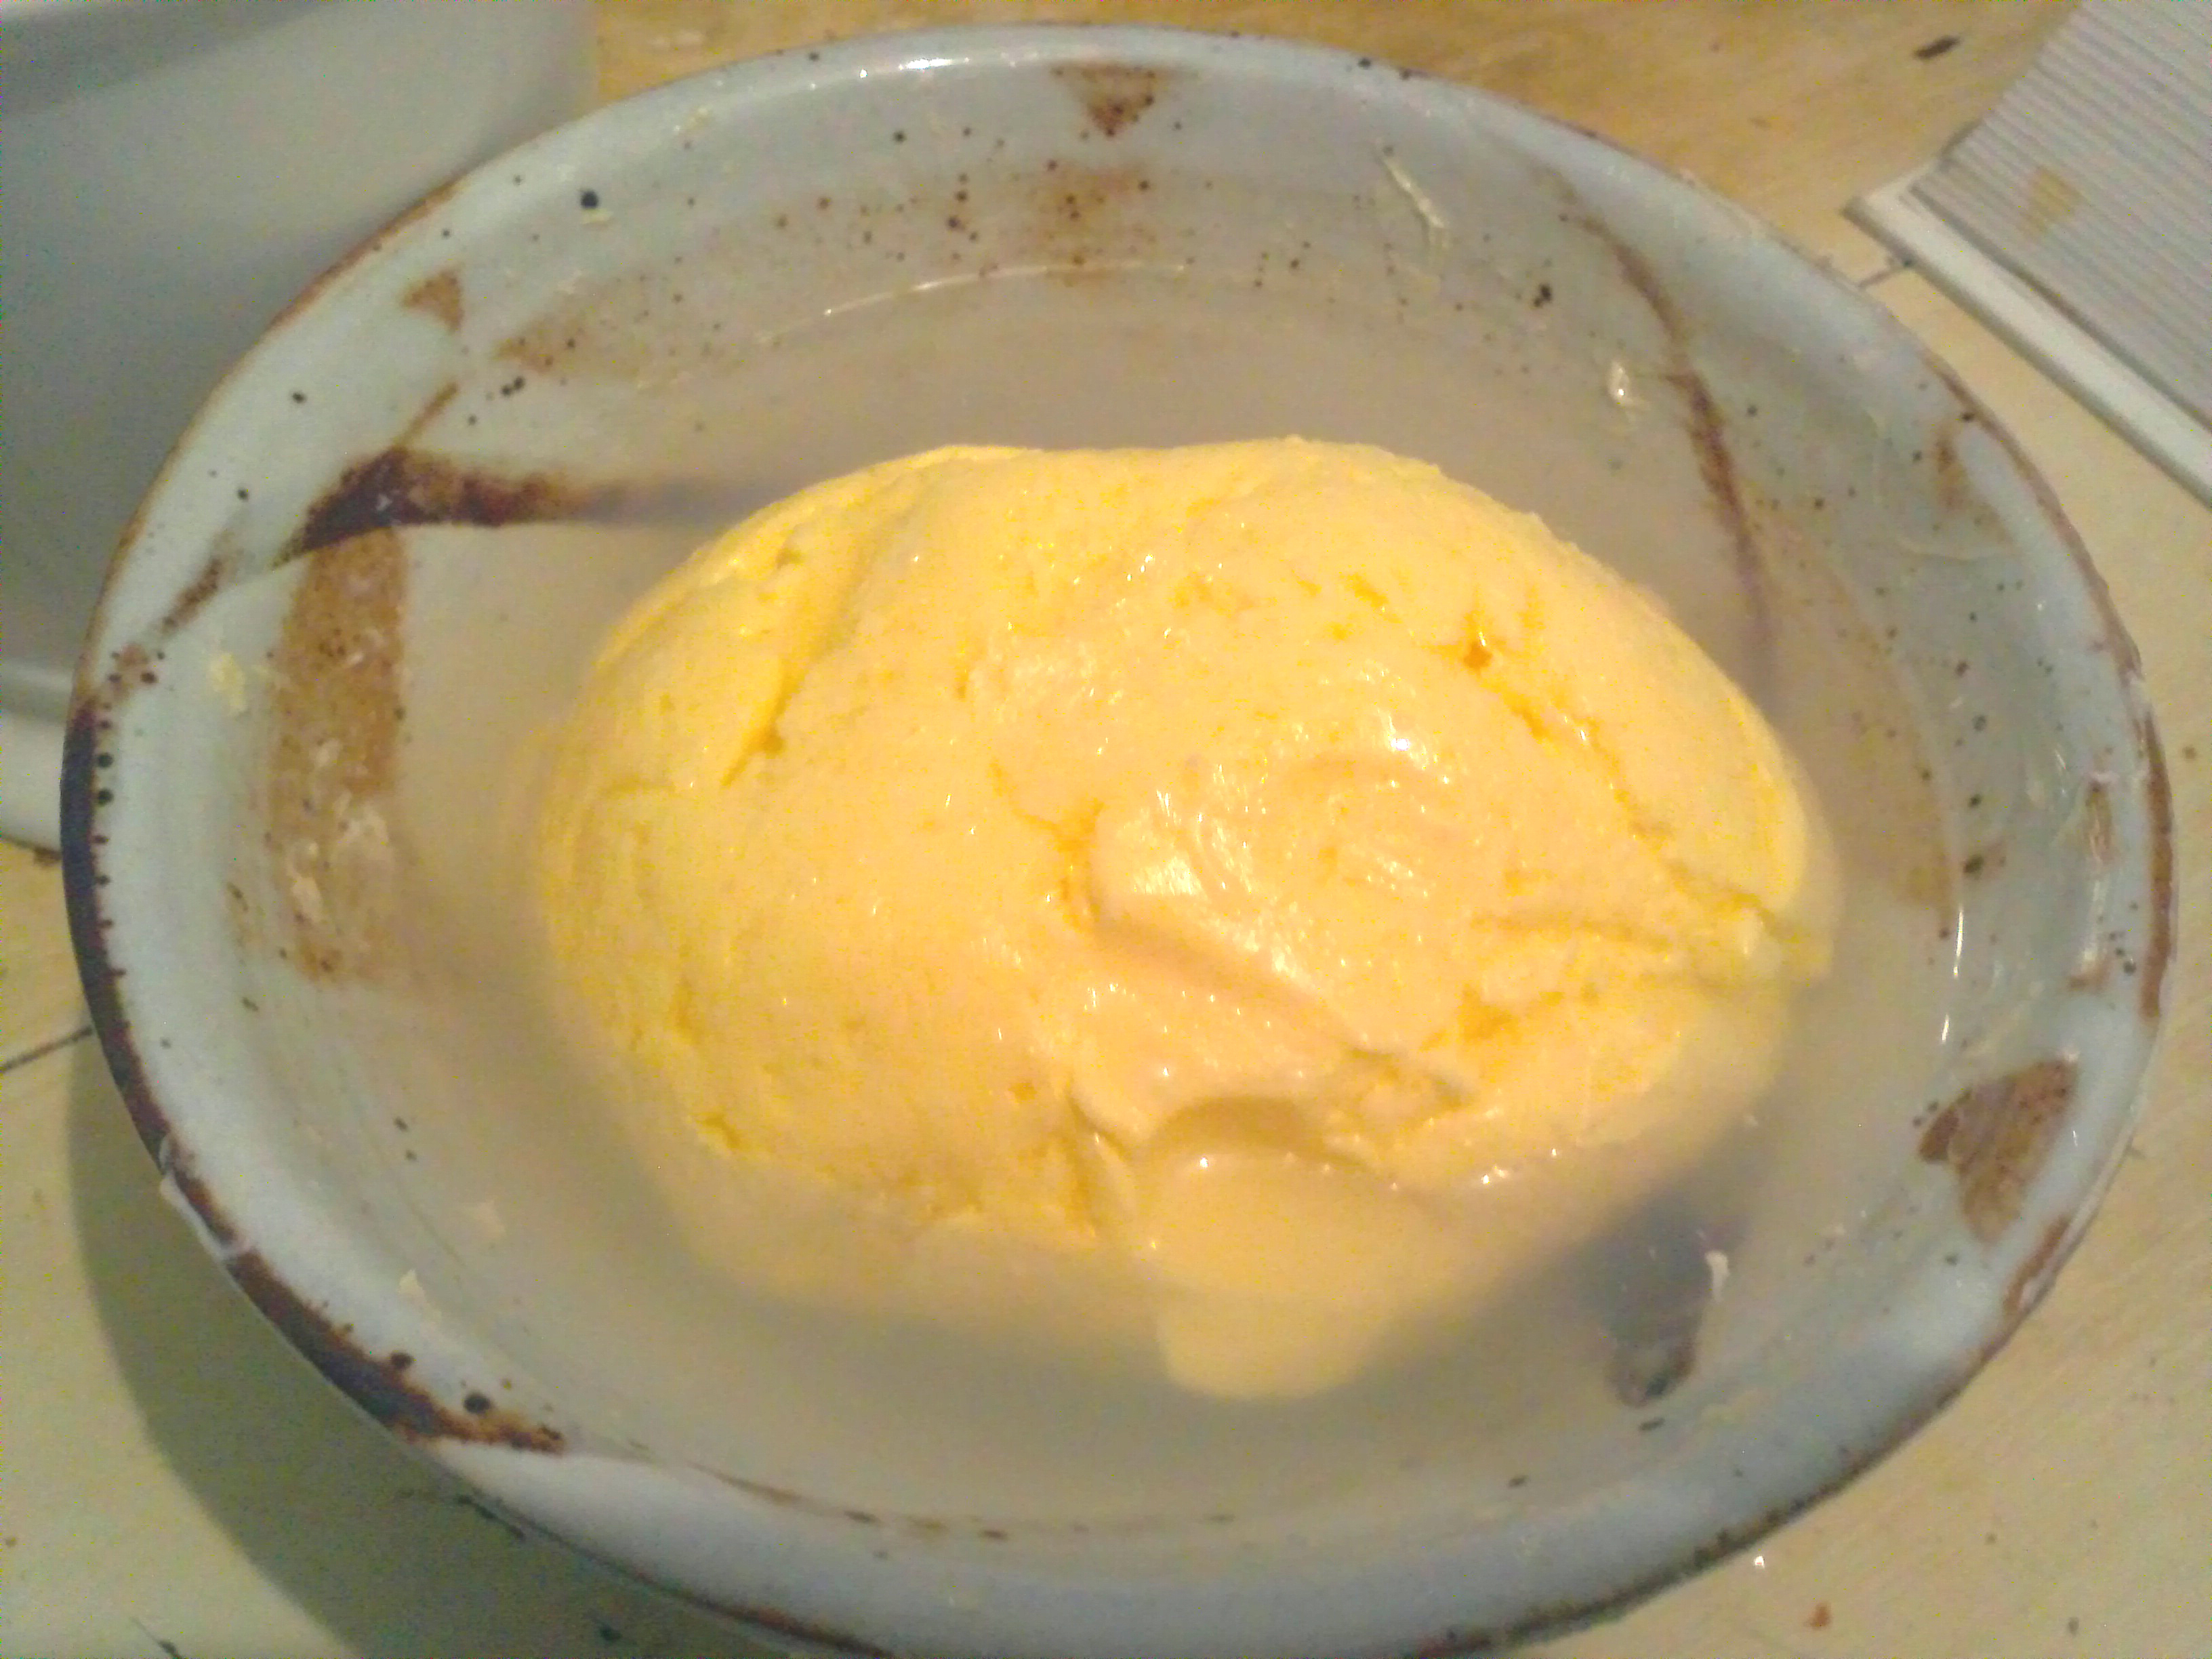 What happens when you eat rancid butter?